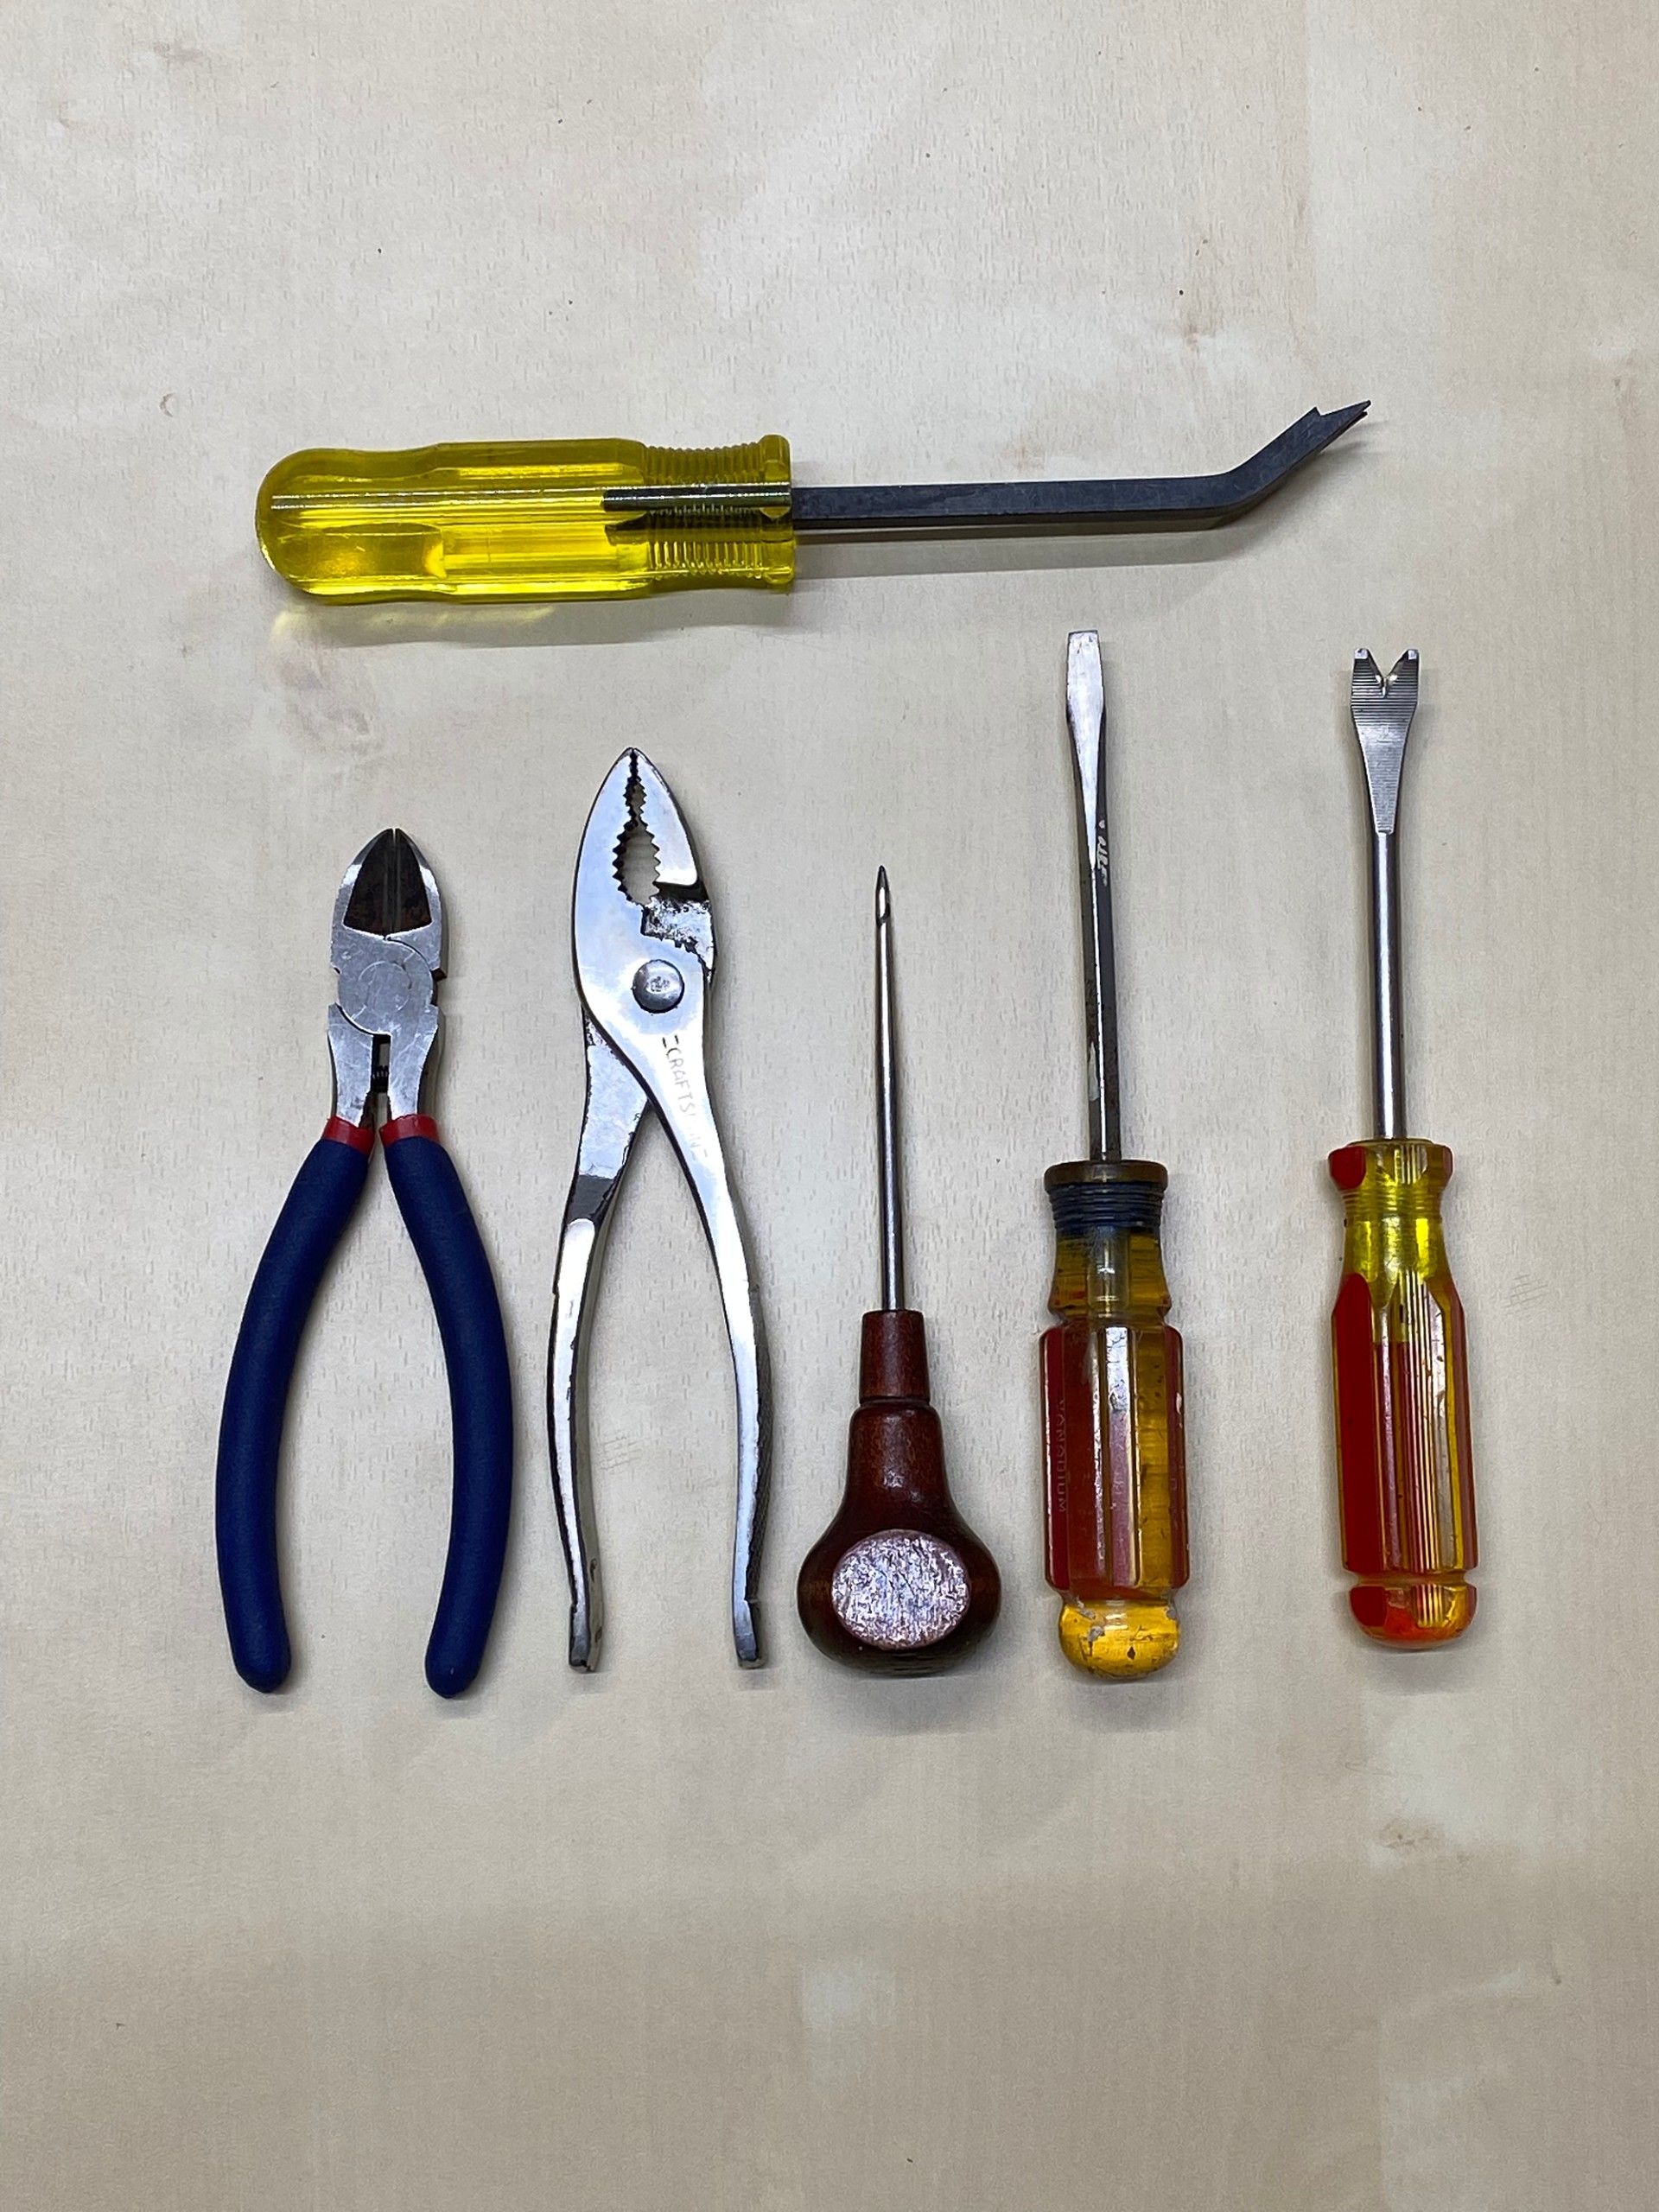 Tools you need to start upholstery as a hobby - SH Upholstery